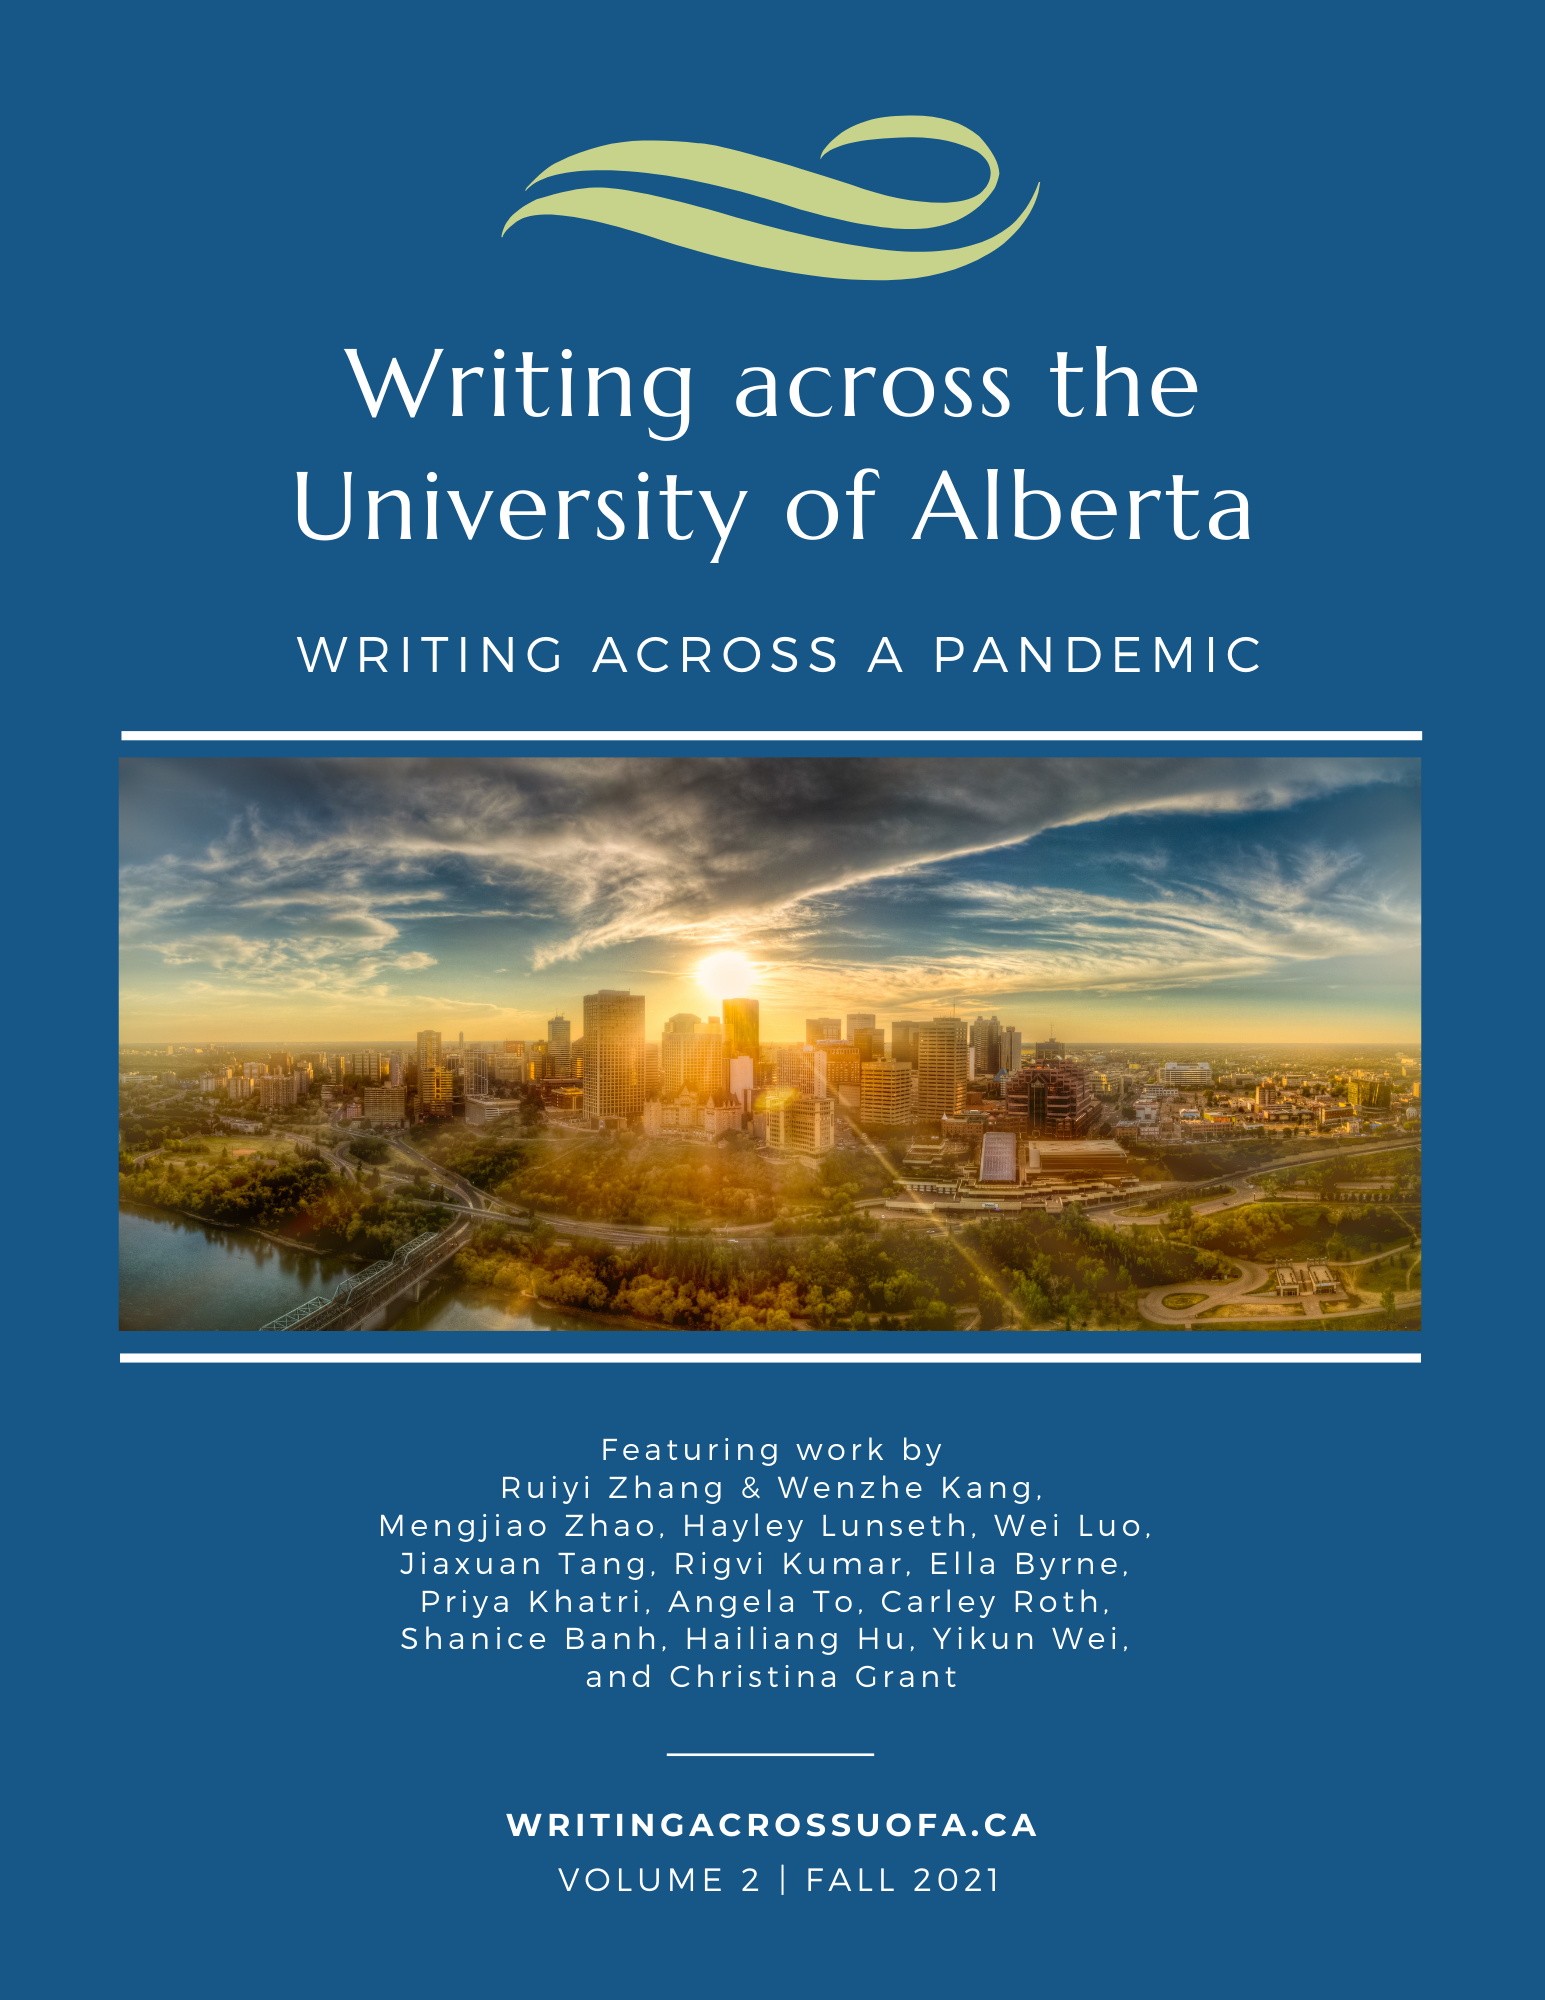 Cover image for Volume 2 of Writing across the University of Alberta. Feature scenic image of Edmonton and names of authors